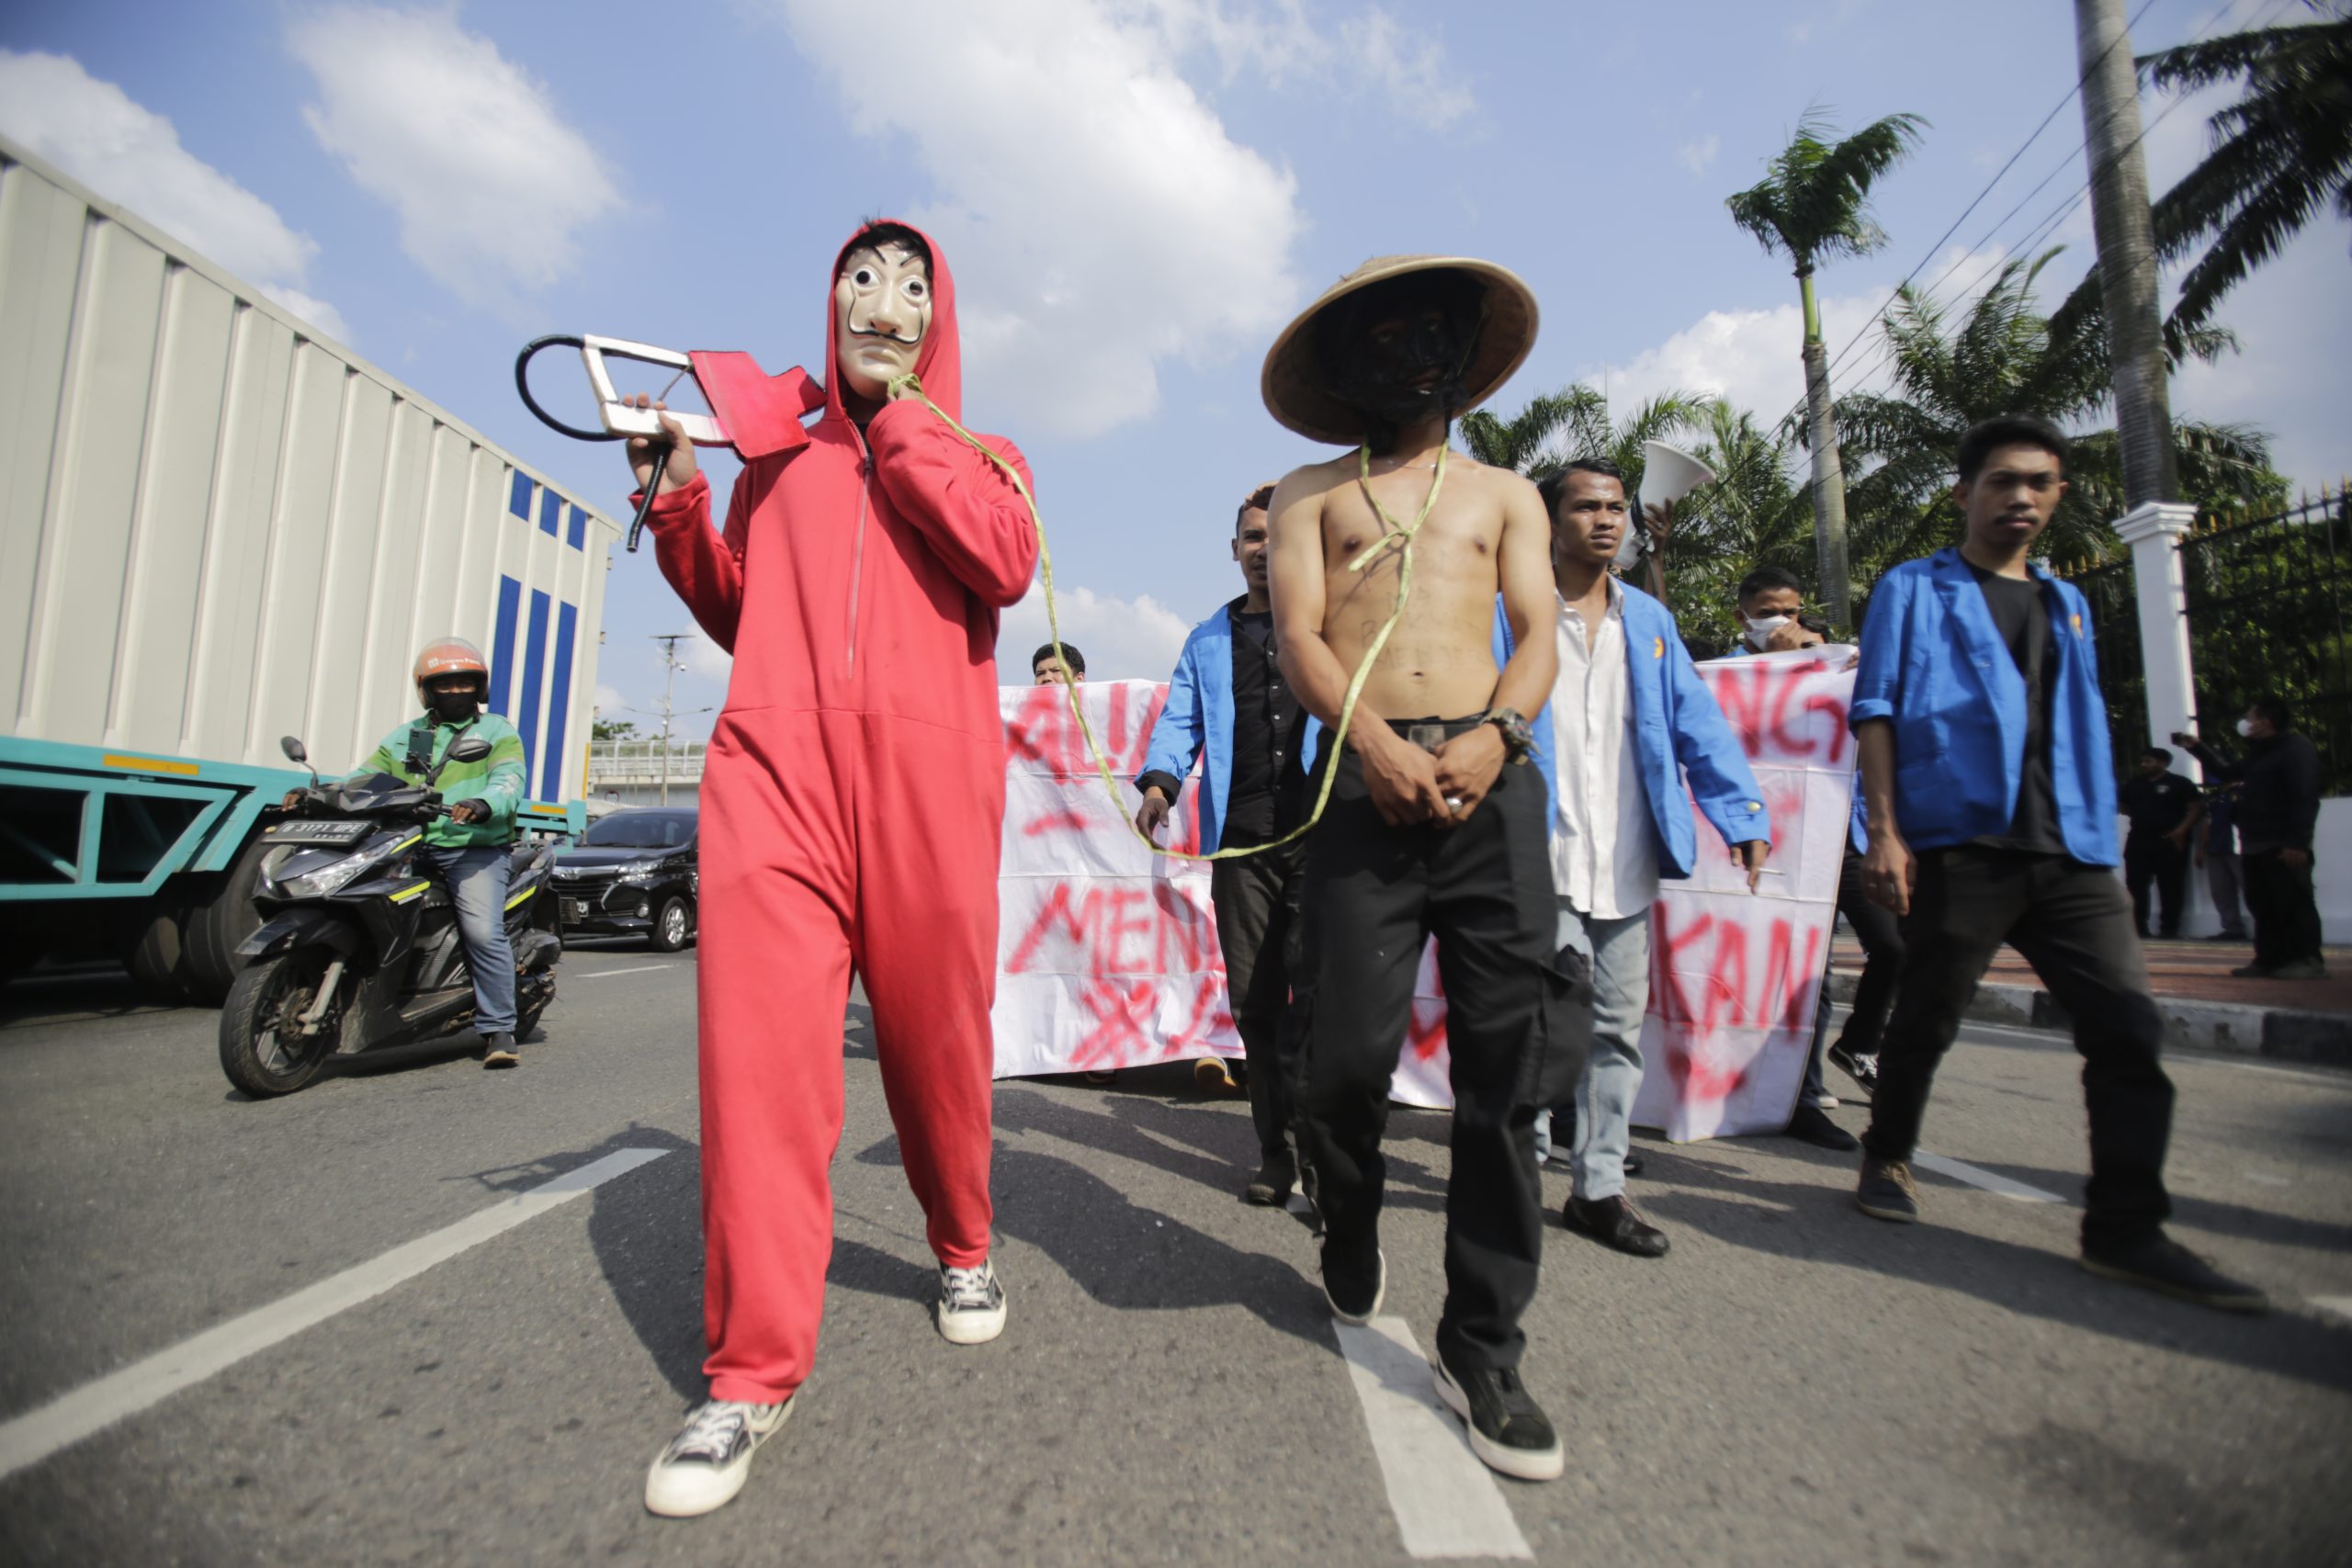 Student demonstrators depicting fuel mafia and victim chained on his neck, walking down the street. Indonesia